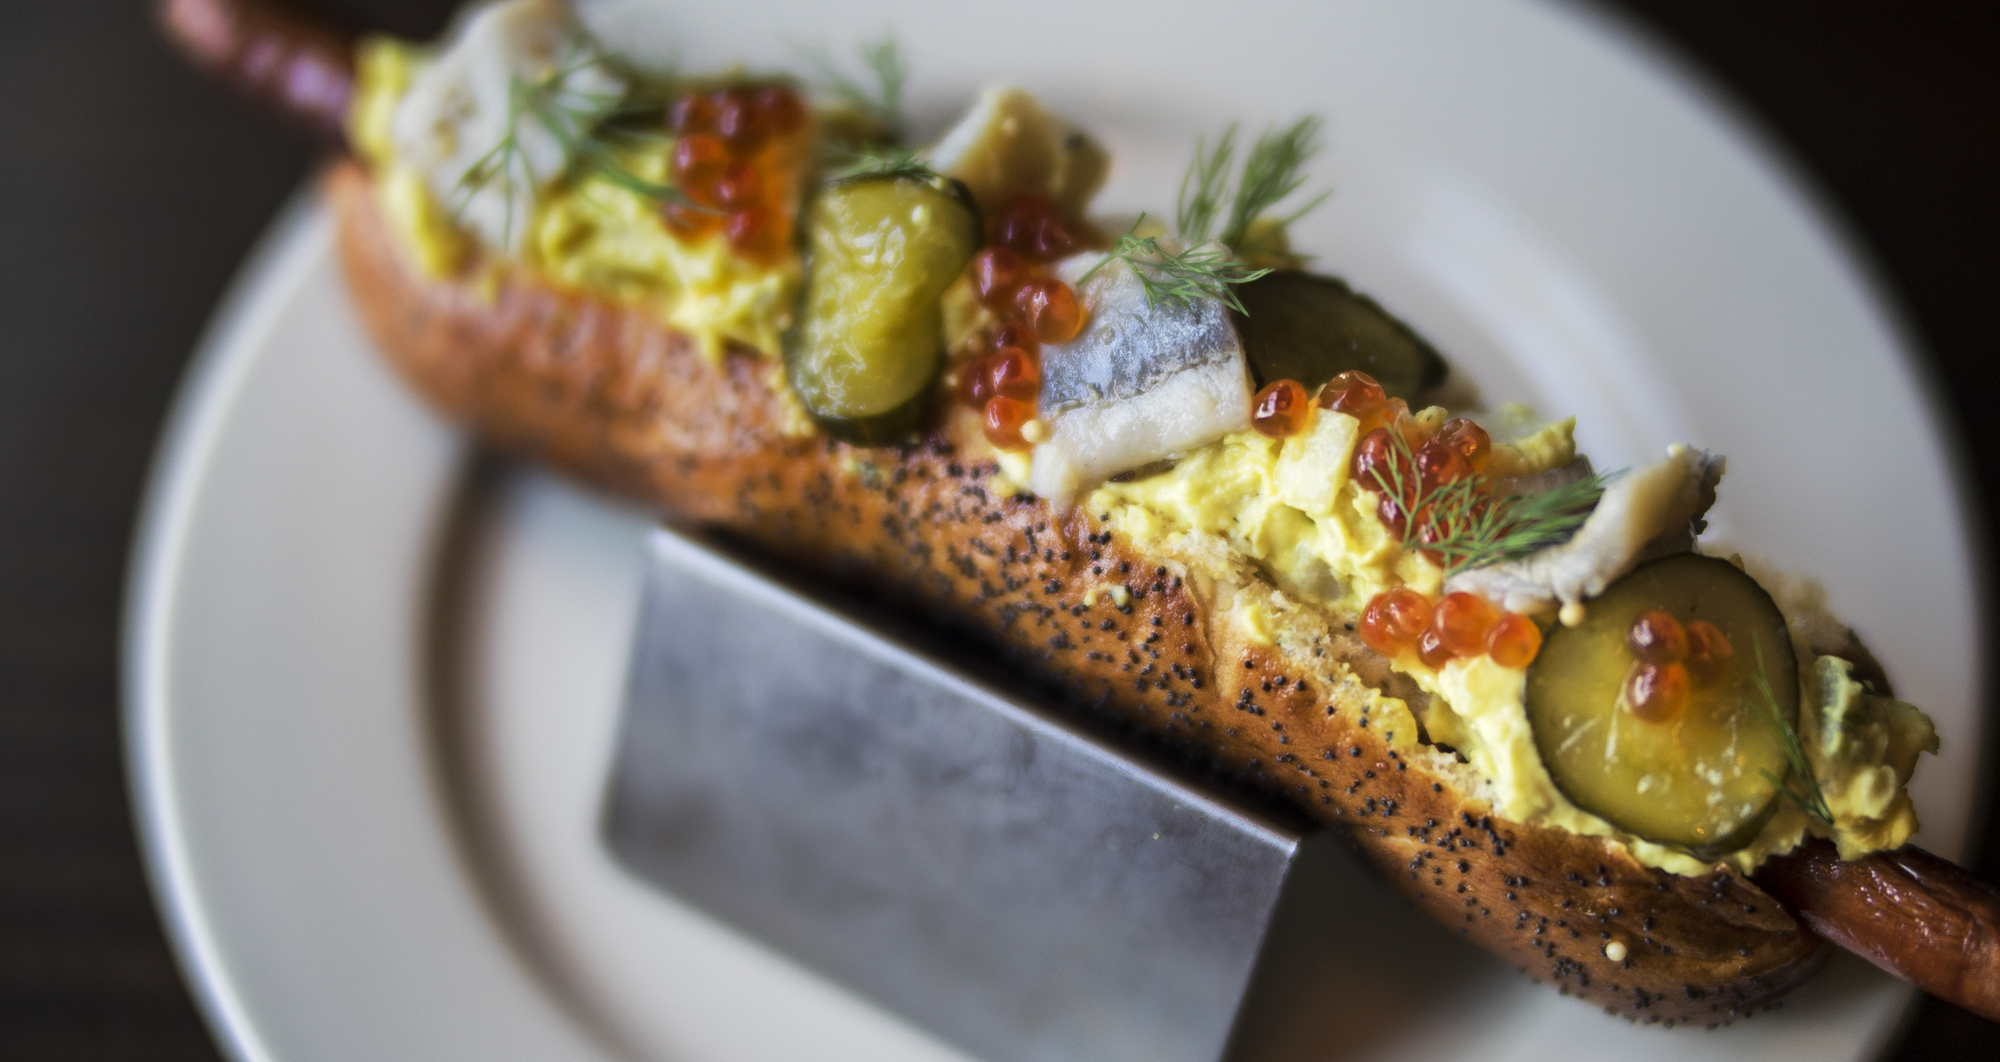 A foot-long hot dog is dressed with potato salad, pickled herring, fermented cucumber and salmon roe.